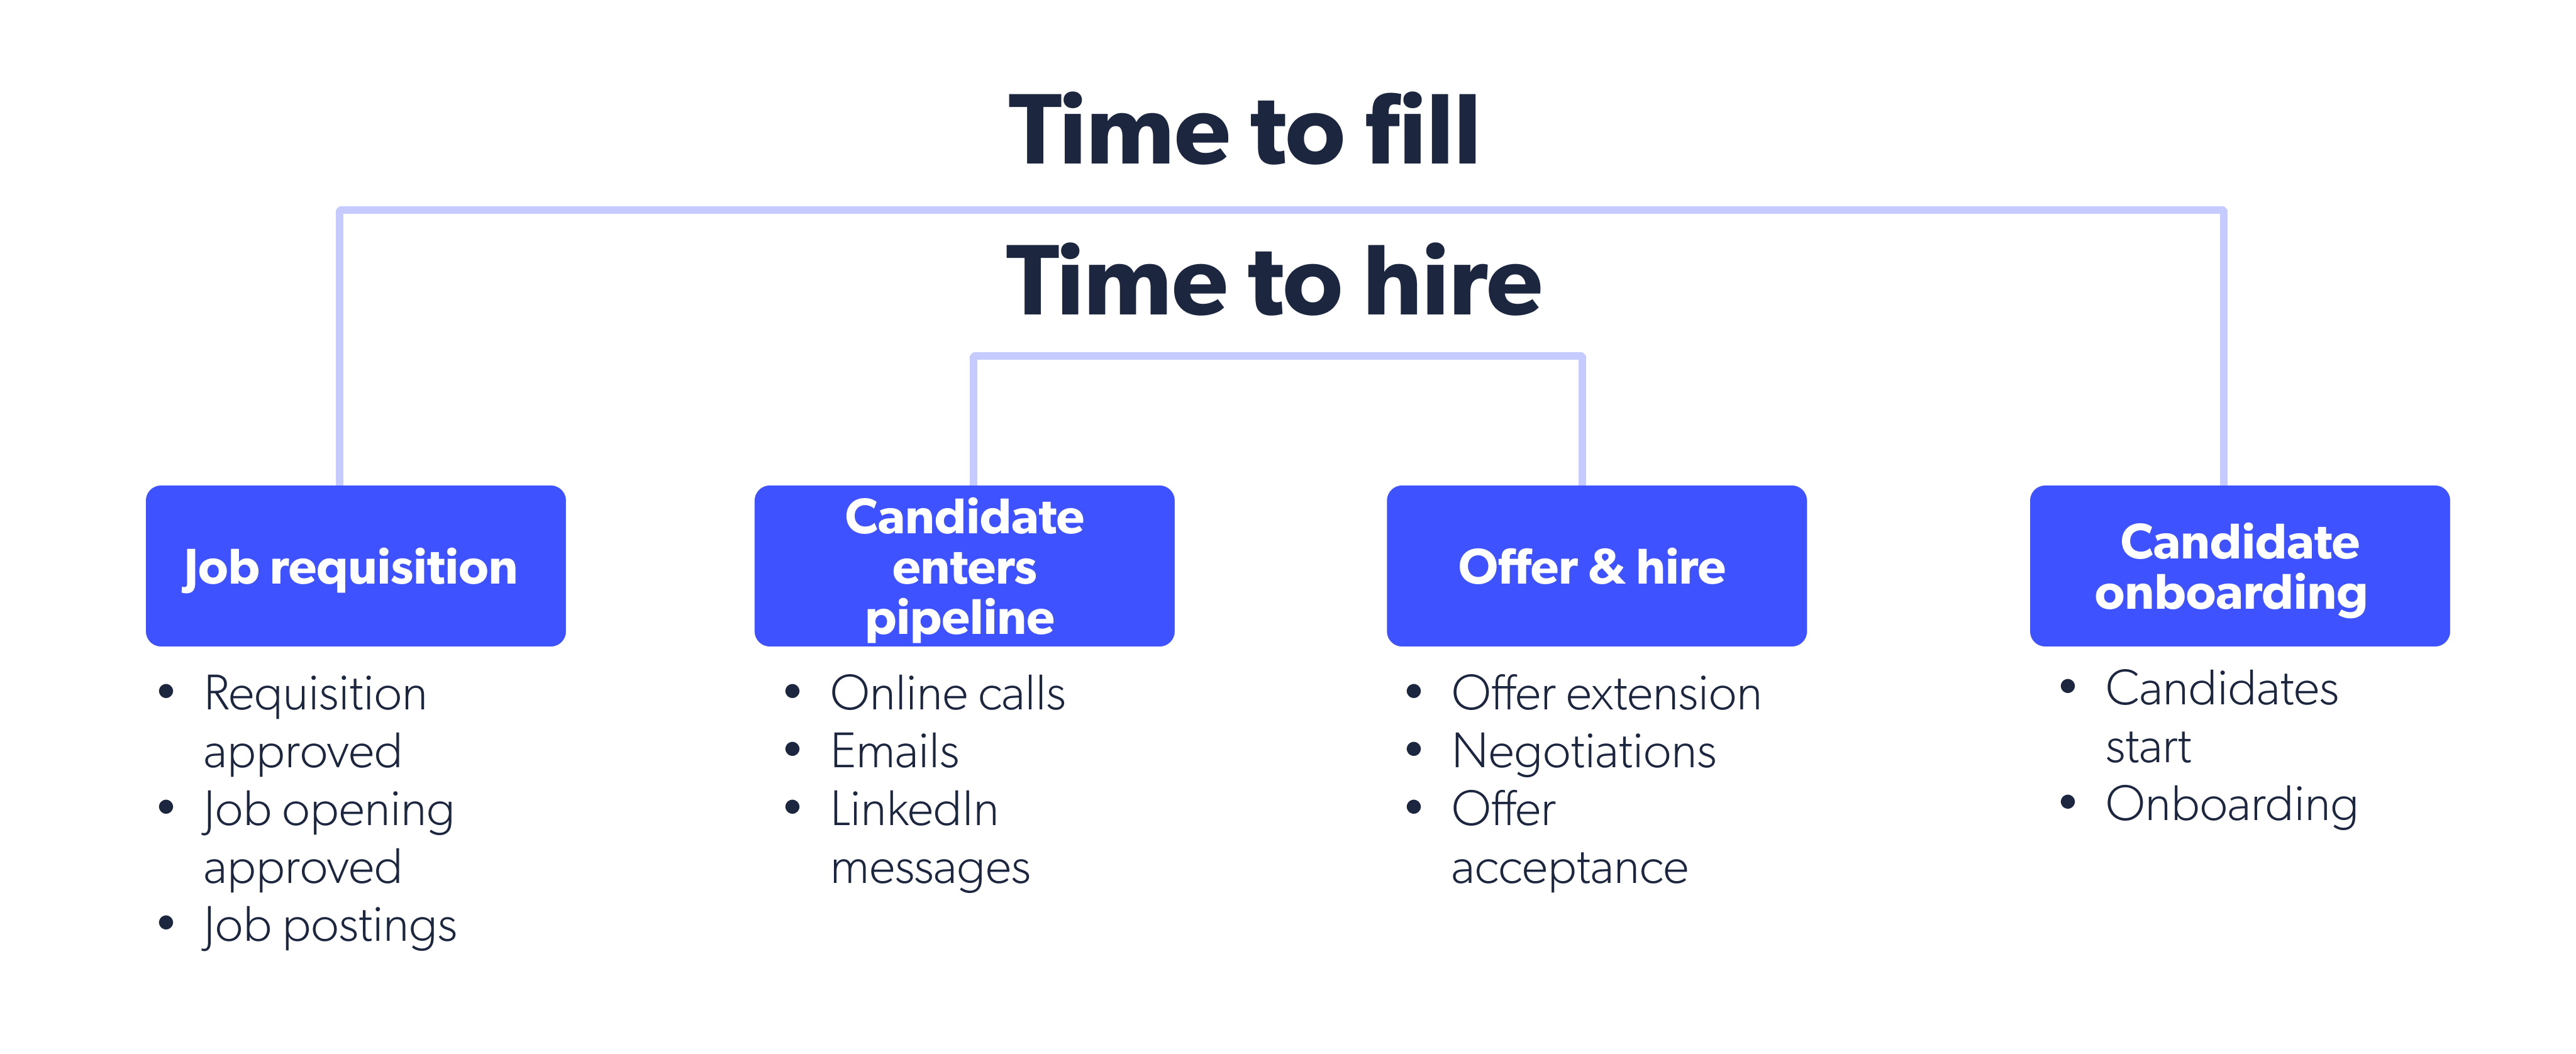 Time to fill vs. time to hire